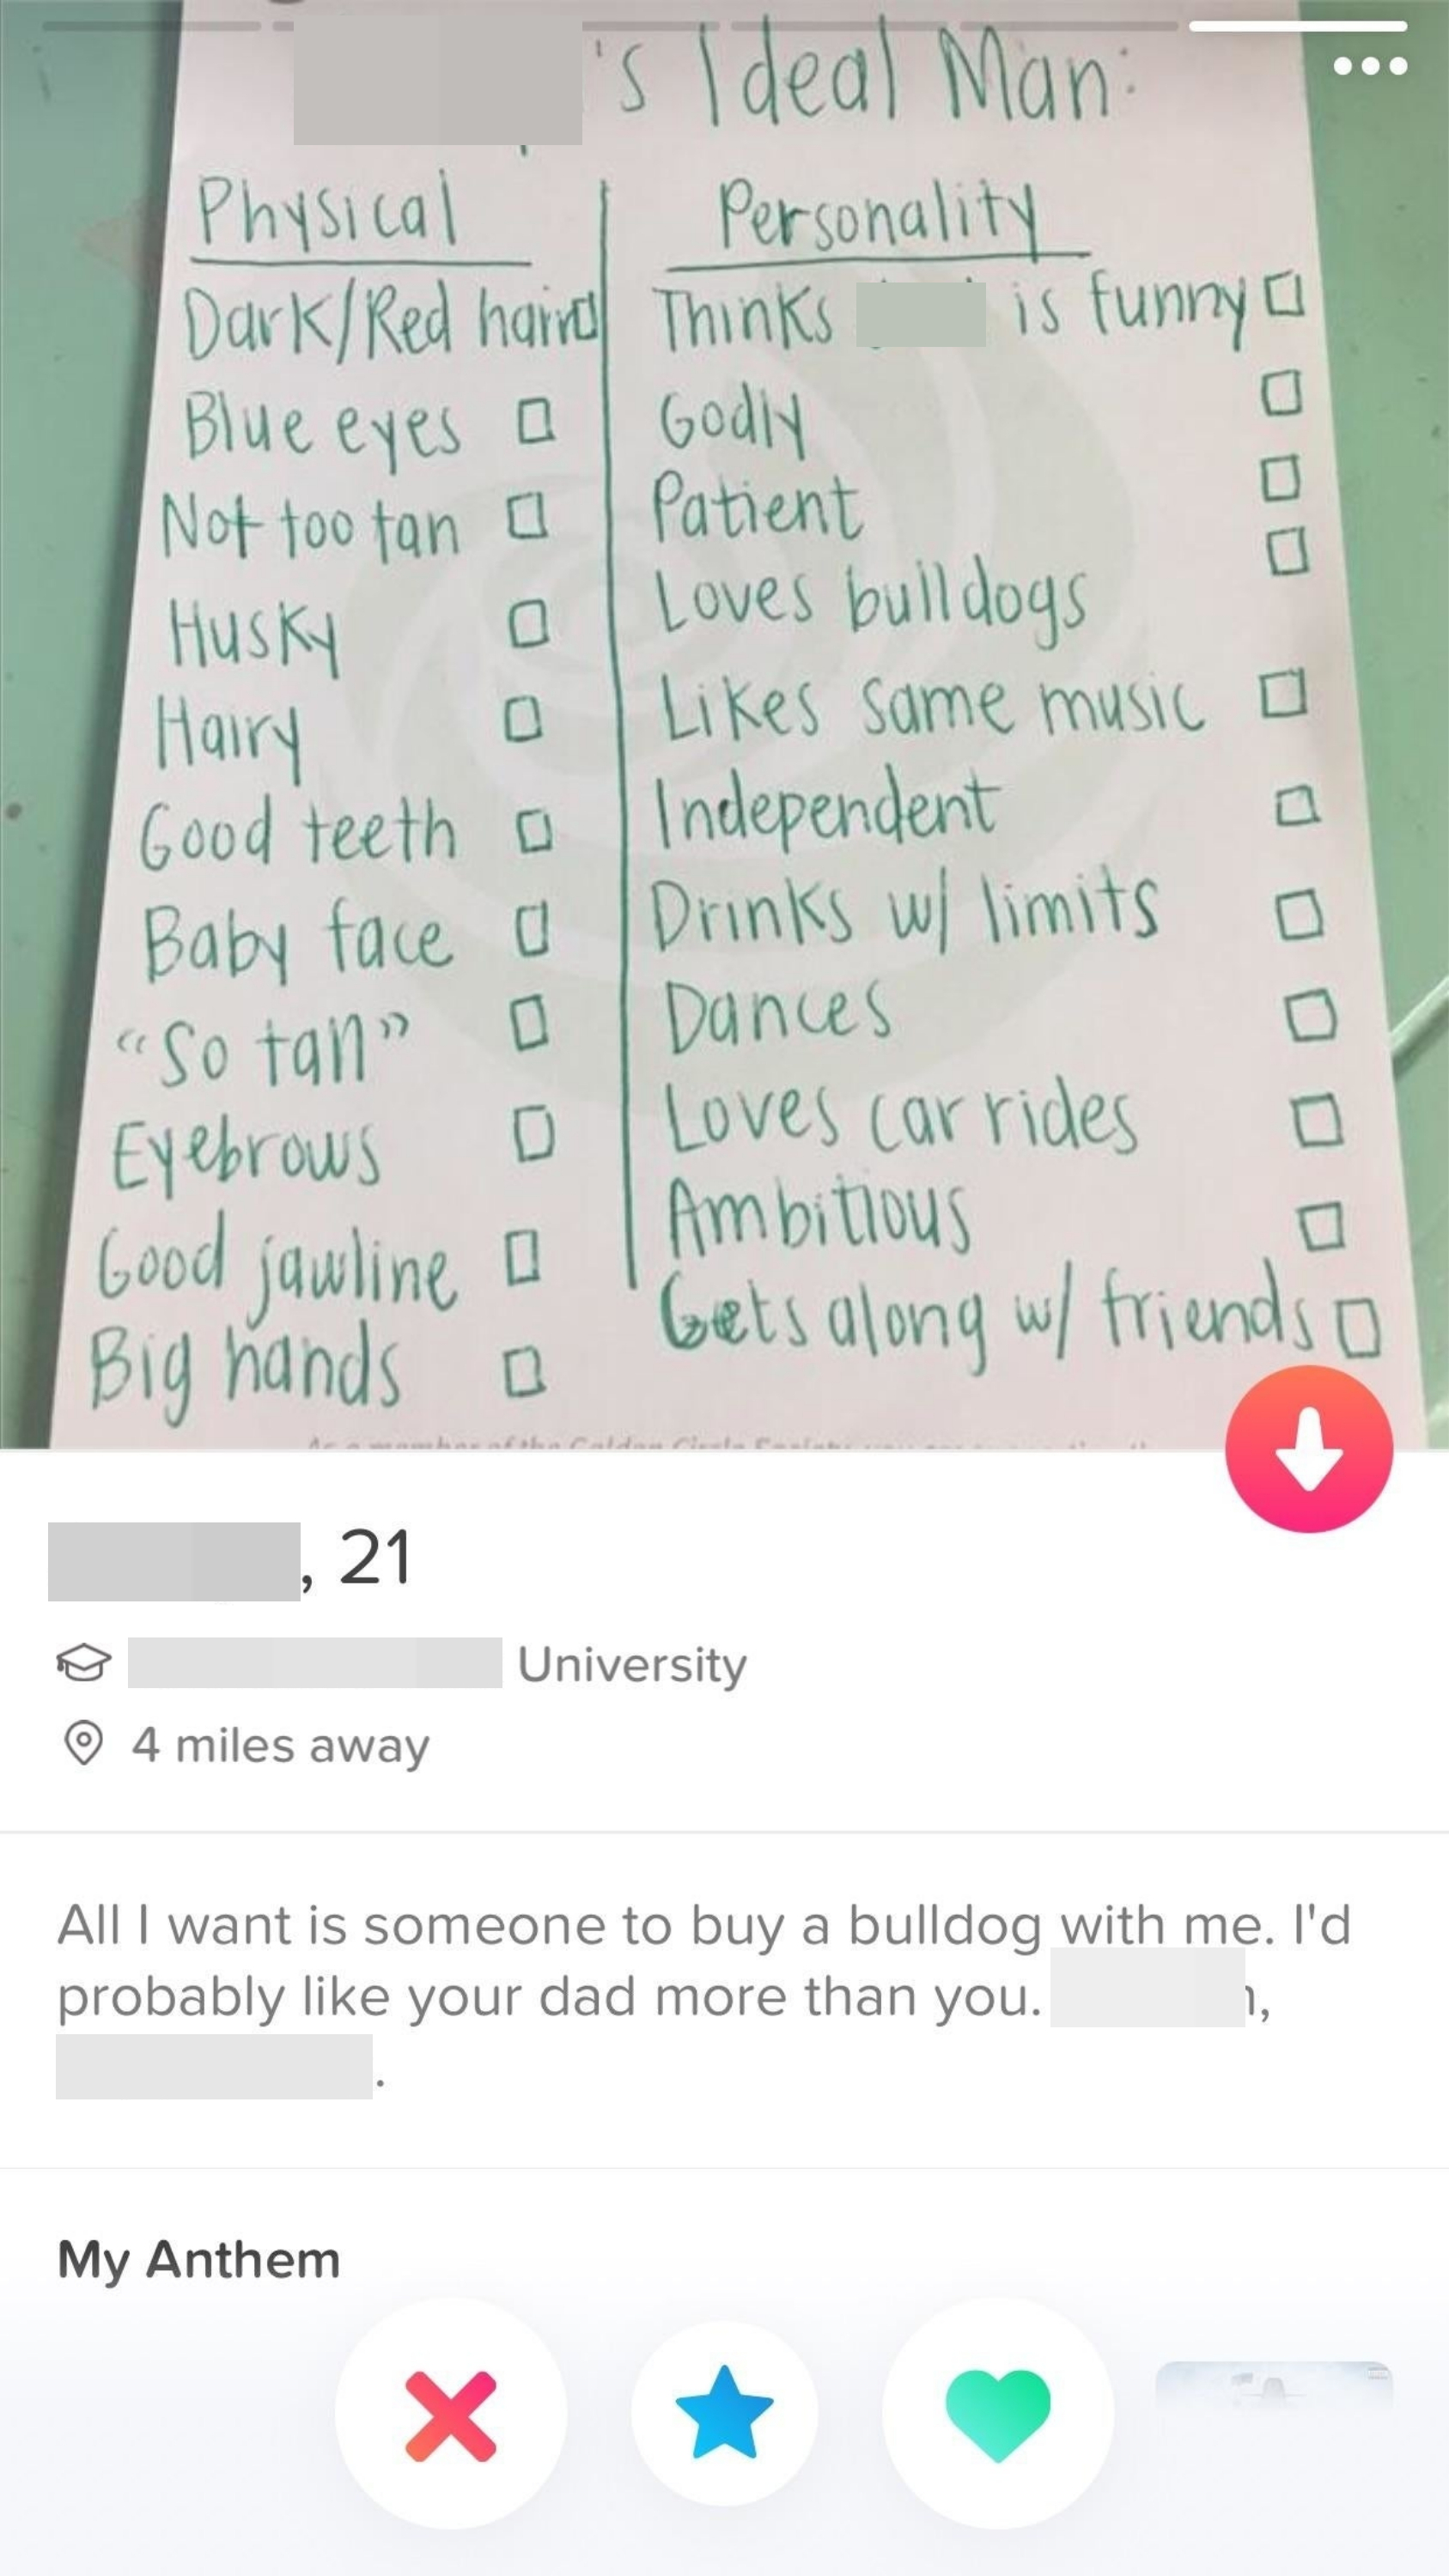 photo of the long wish list as well as all i want is someone to buy a bulldog with me added to their bio